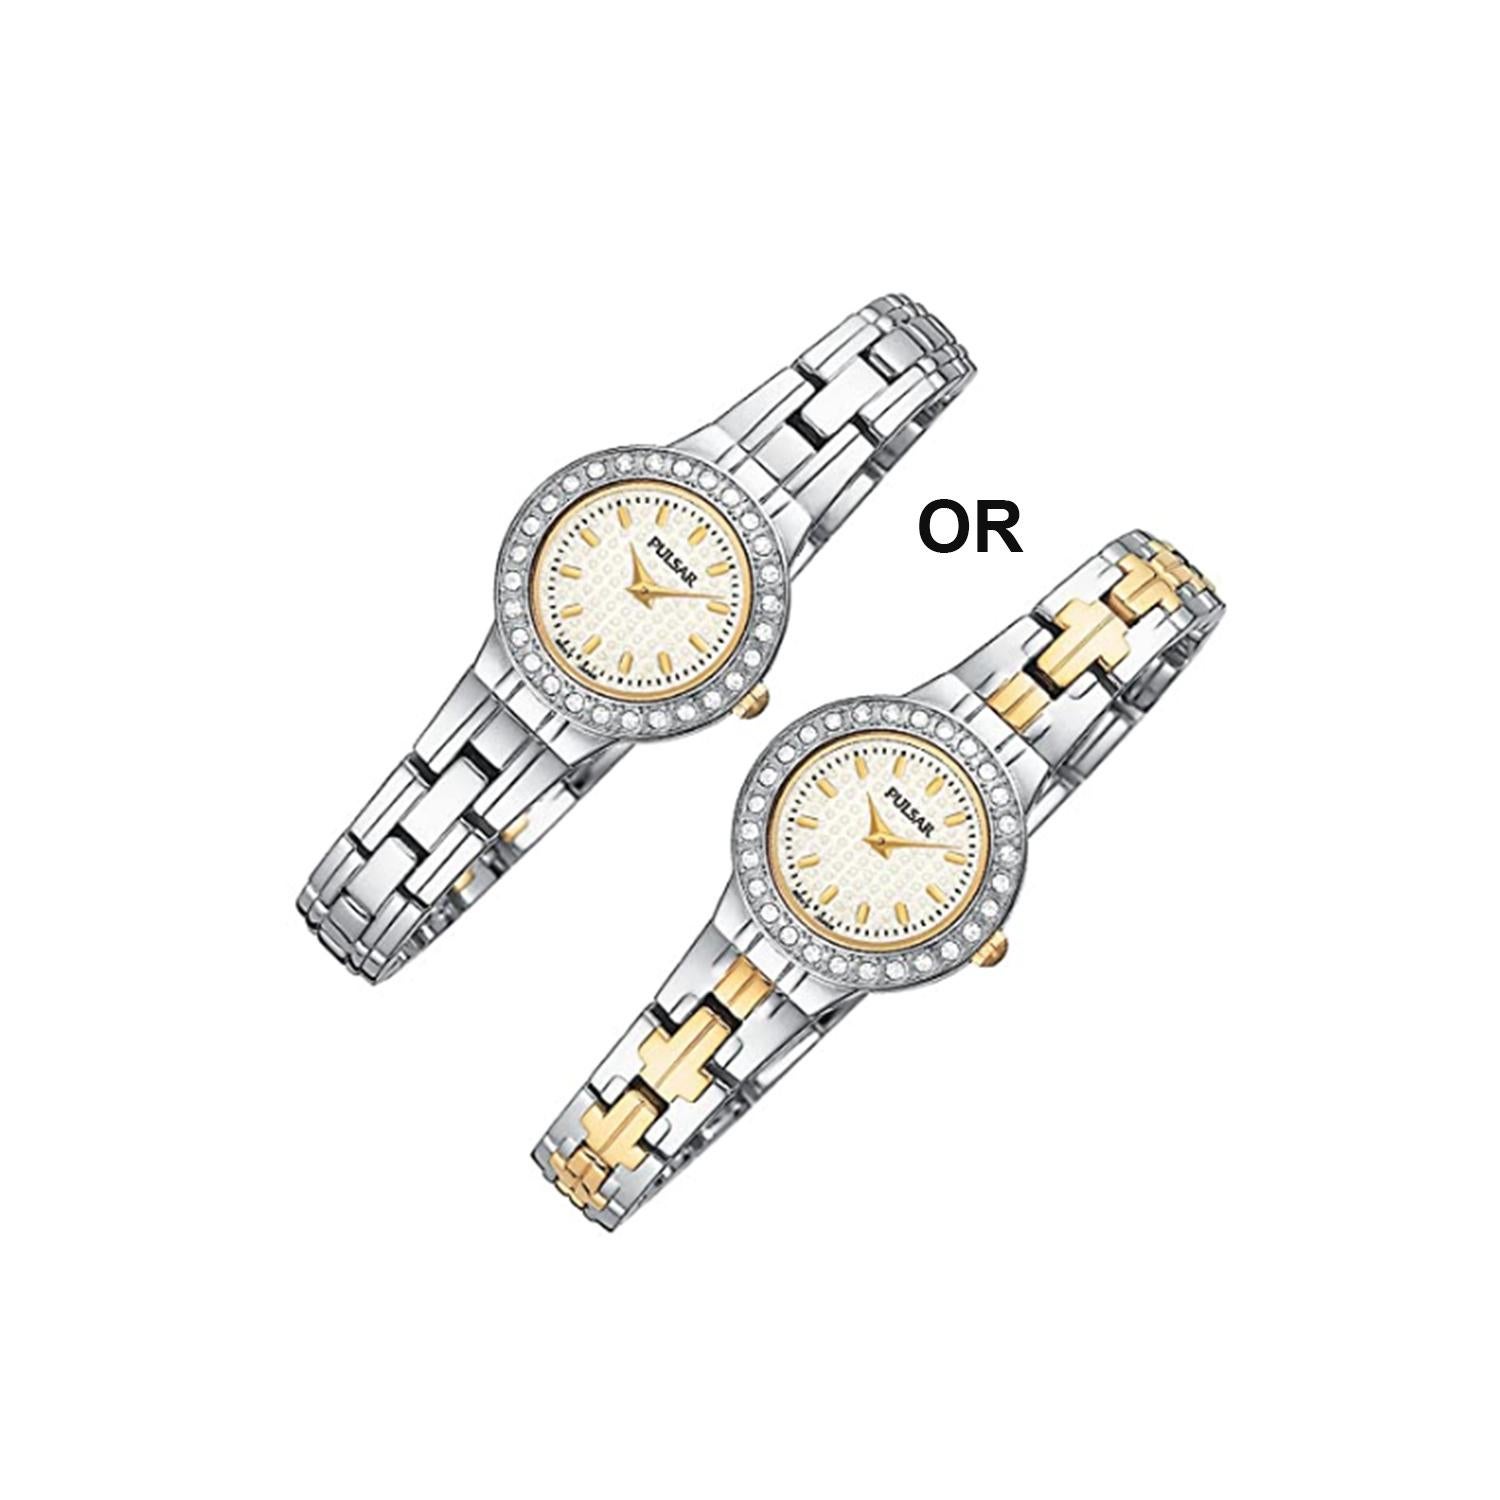 Pre-owned Pulsar Two Tone Stainless Steel White Sparkling Dial Quartz Women's Watch PEGC55. The Bracelet of this watch has Nicks, Scratches and Discoloration on Gold-Tone Parts. This Beautiful Timepiece is Powered By a Quartz (Battery) Movement and